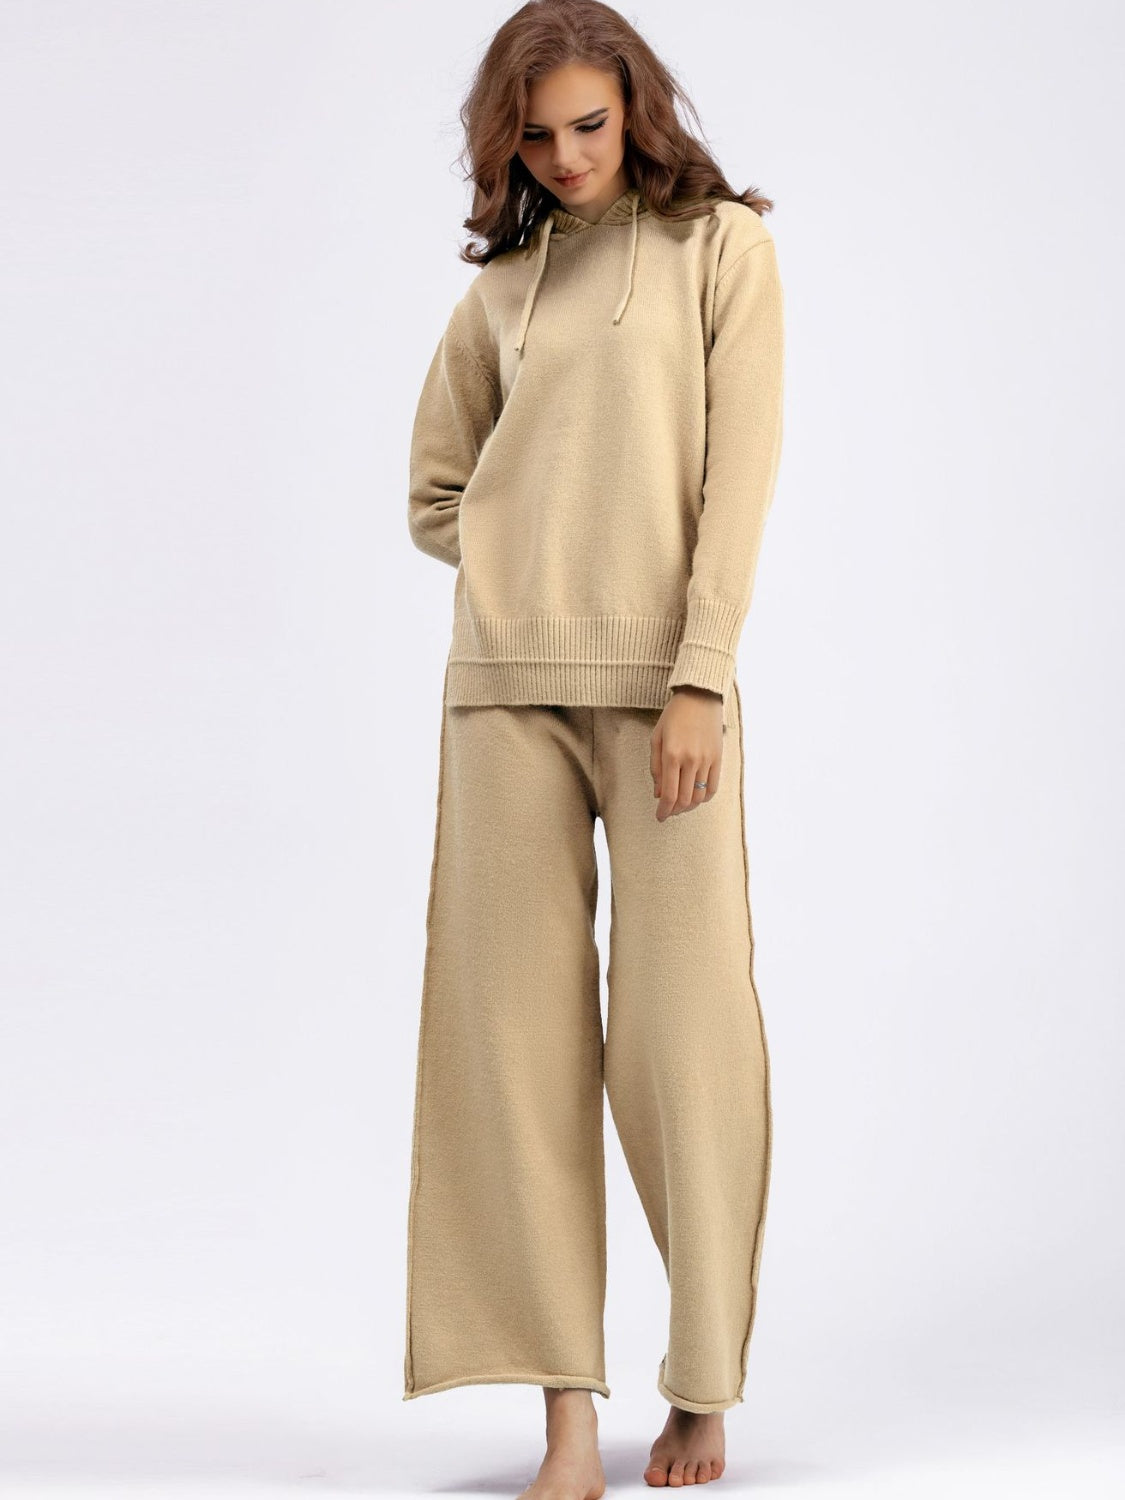 Long Sleeve Hooded Sweater and Knit Pants Set BLUE ZONE PLANET